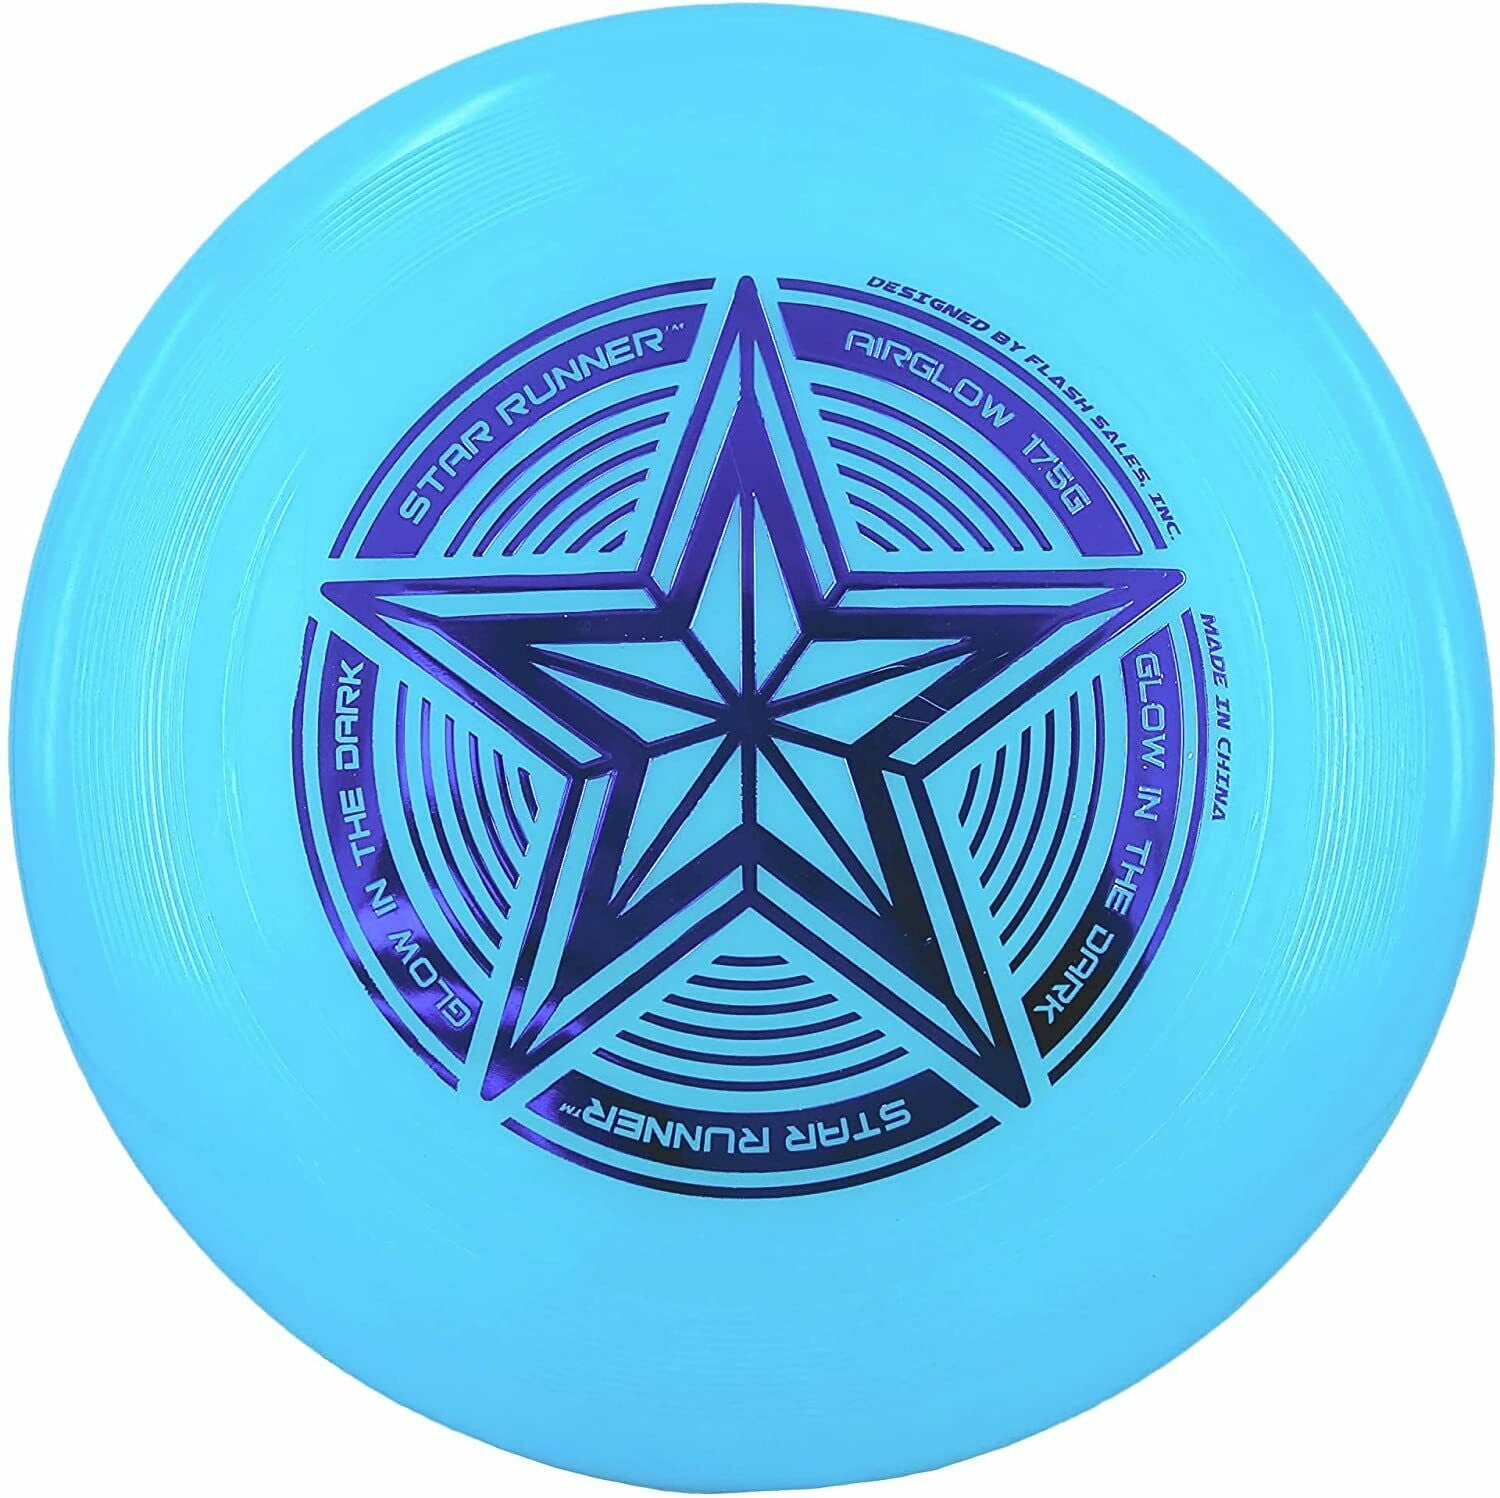 Pet Toys-Frisbees Discs Game,Flying Disc with Light,Glow in The Dark Flying Discs for Kids Adults Training Dog Toy Interactive for Outdoor Sport Night Games 